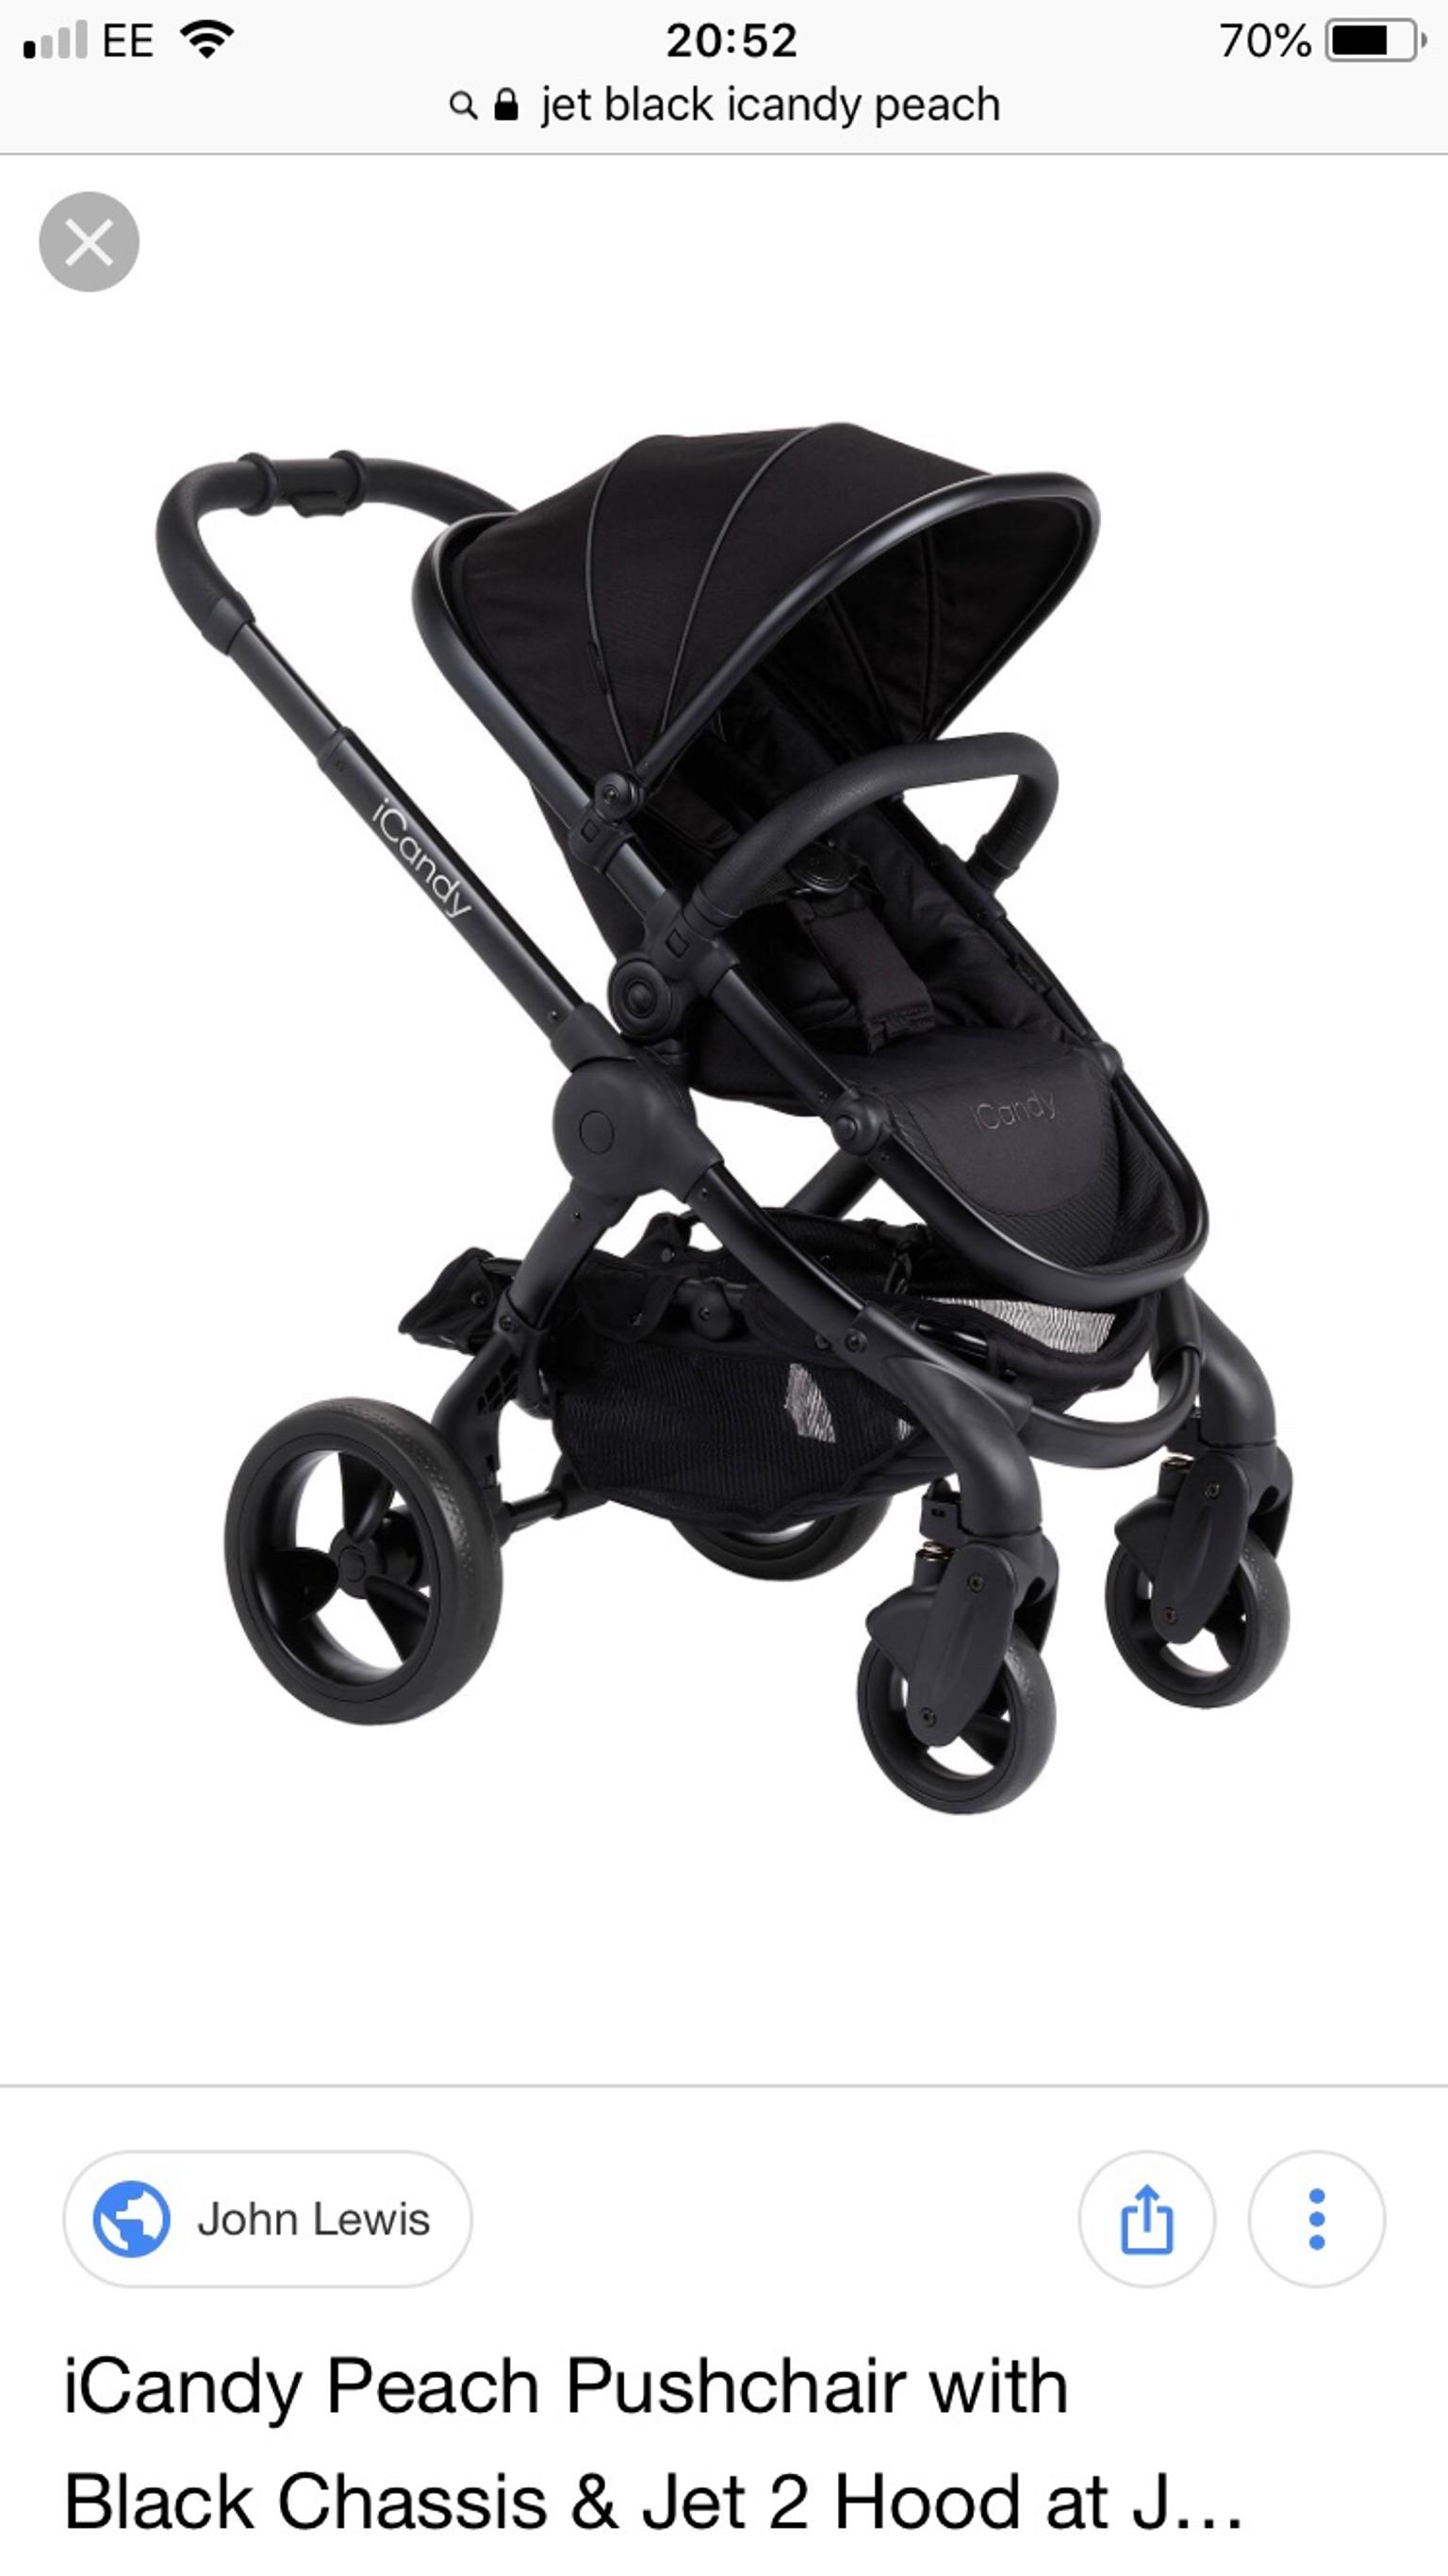 icandy peach travel system price